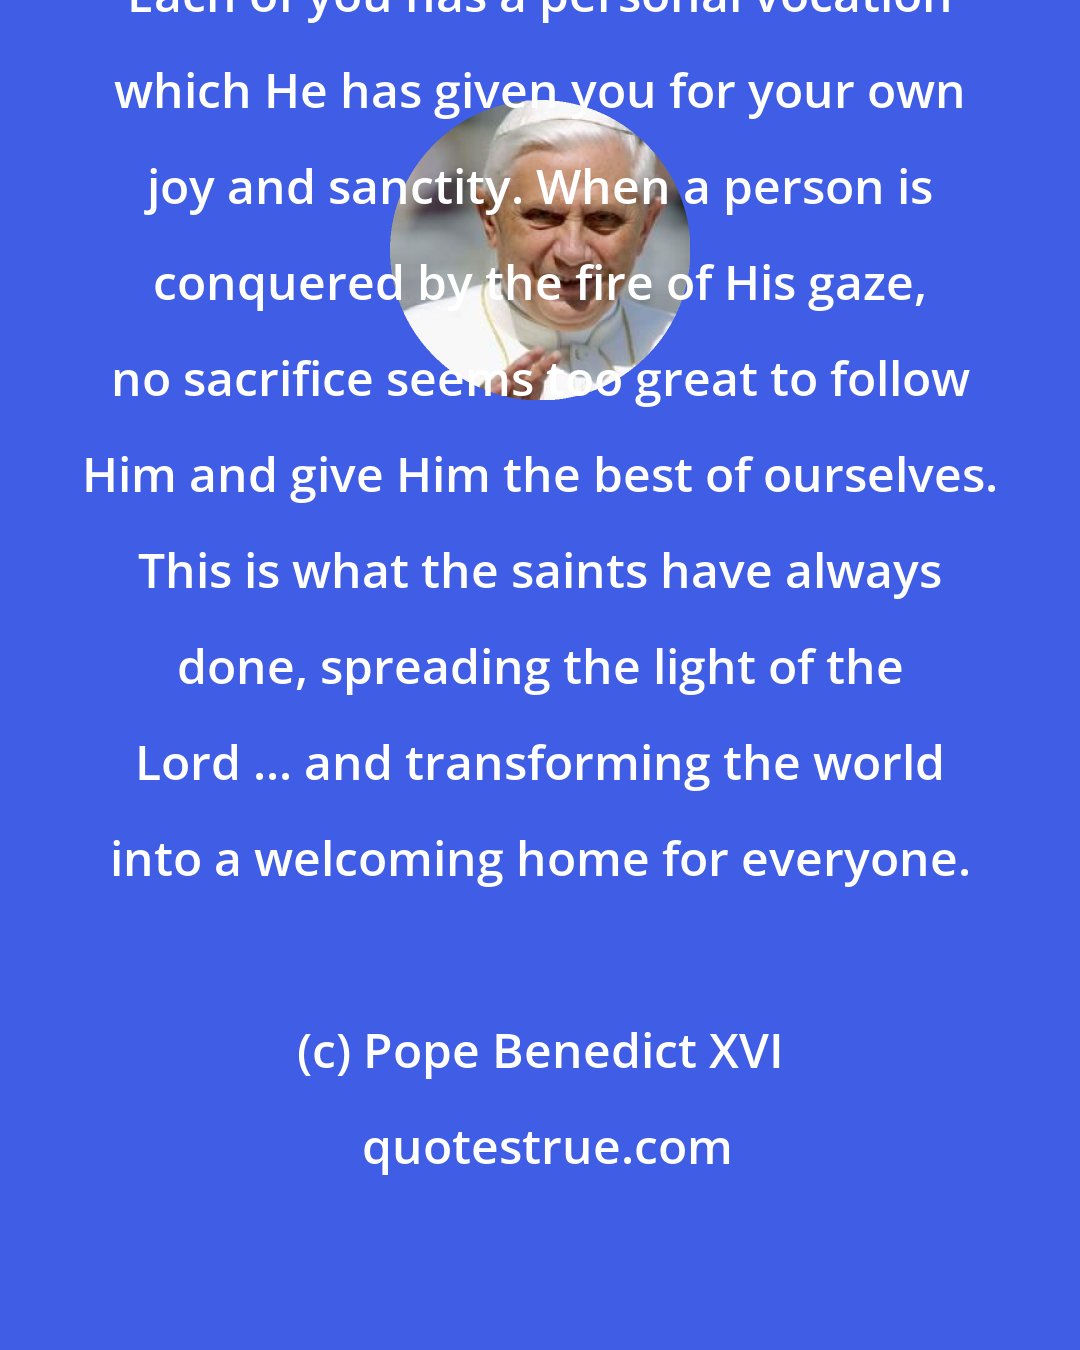 Pope Benedict XVI: Each of you has a personal vocation which He has given you for your own joy and sanctity. When a person is conquered by the fire of His gaze, no sacrifice seems too great to follow Him and give Him the best of ourselves. This is what the saints have always done, spreading the light of the Lord ... and transforming the world into a welcoming home for everyone.